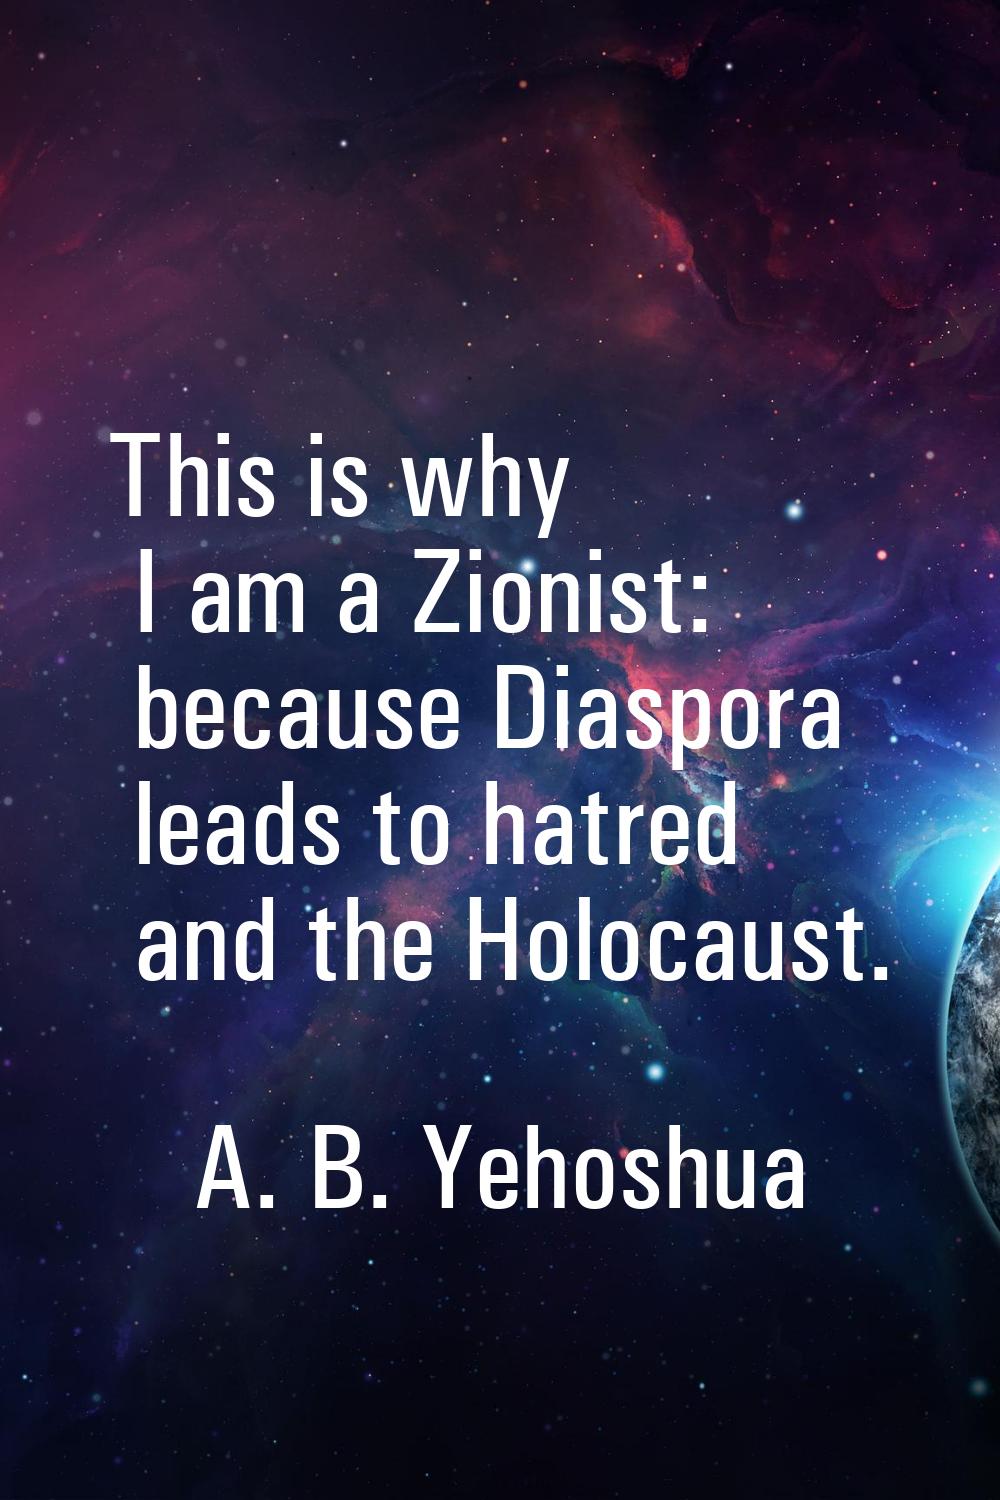 This is why I am a Zionist: because Diaspora leads to hatred and the Holocaust.